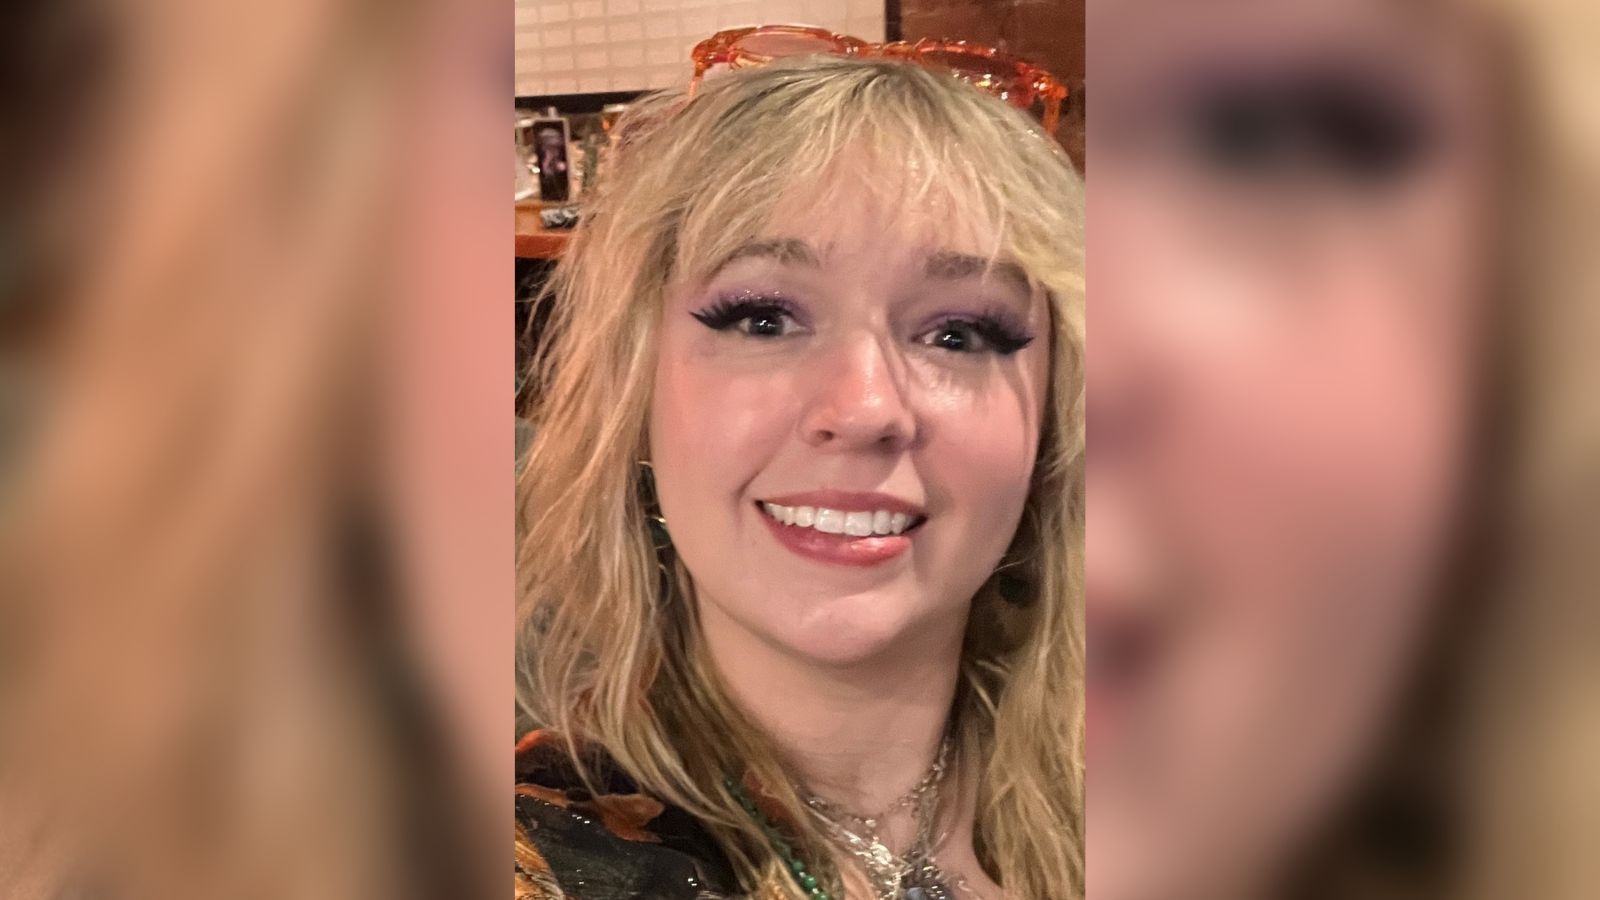 The Unified Police Department says a woman missing from the Olympus Cove area in Millcreek is endan...